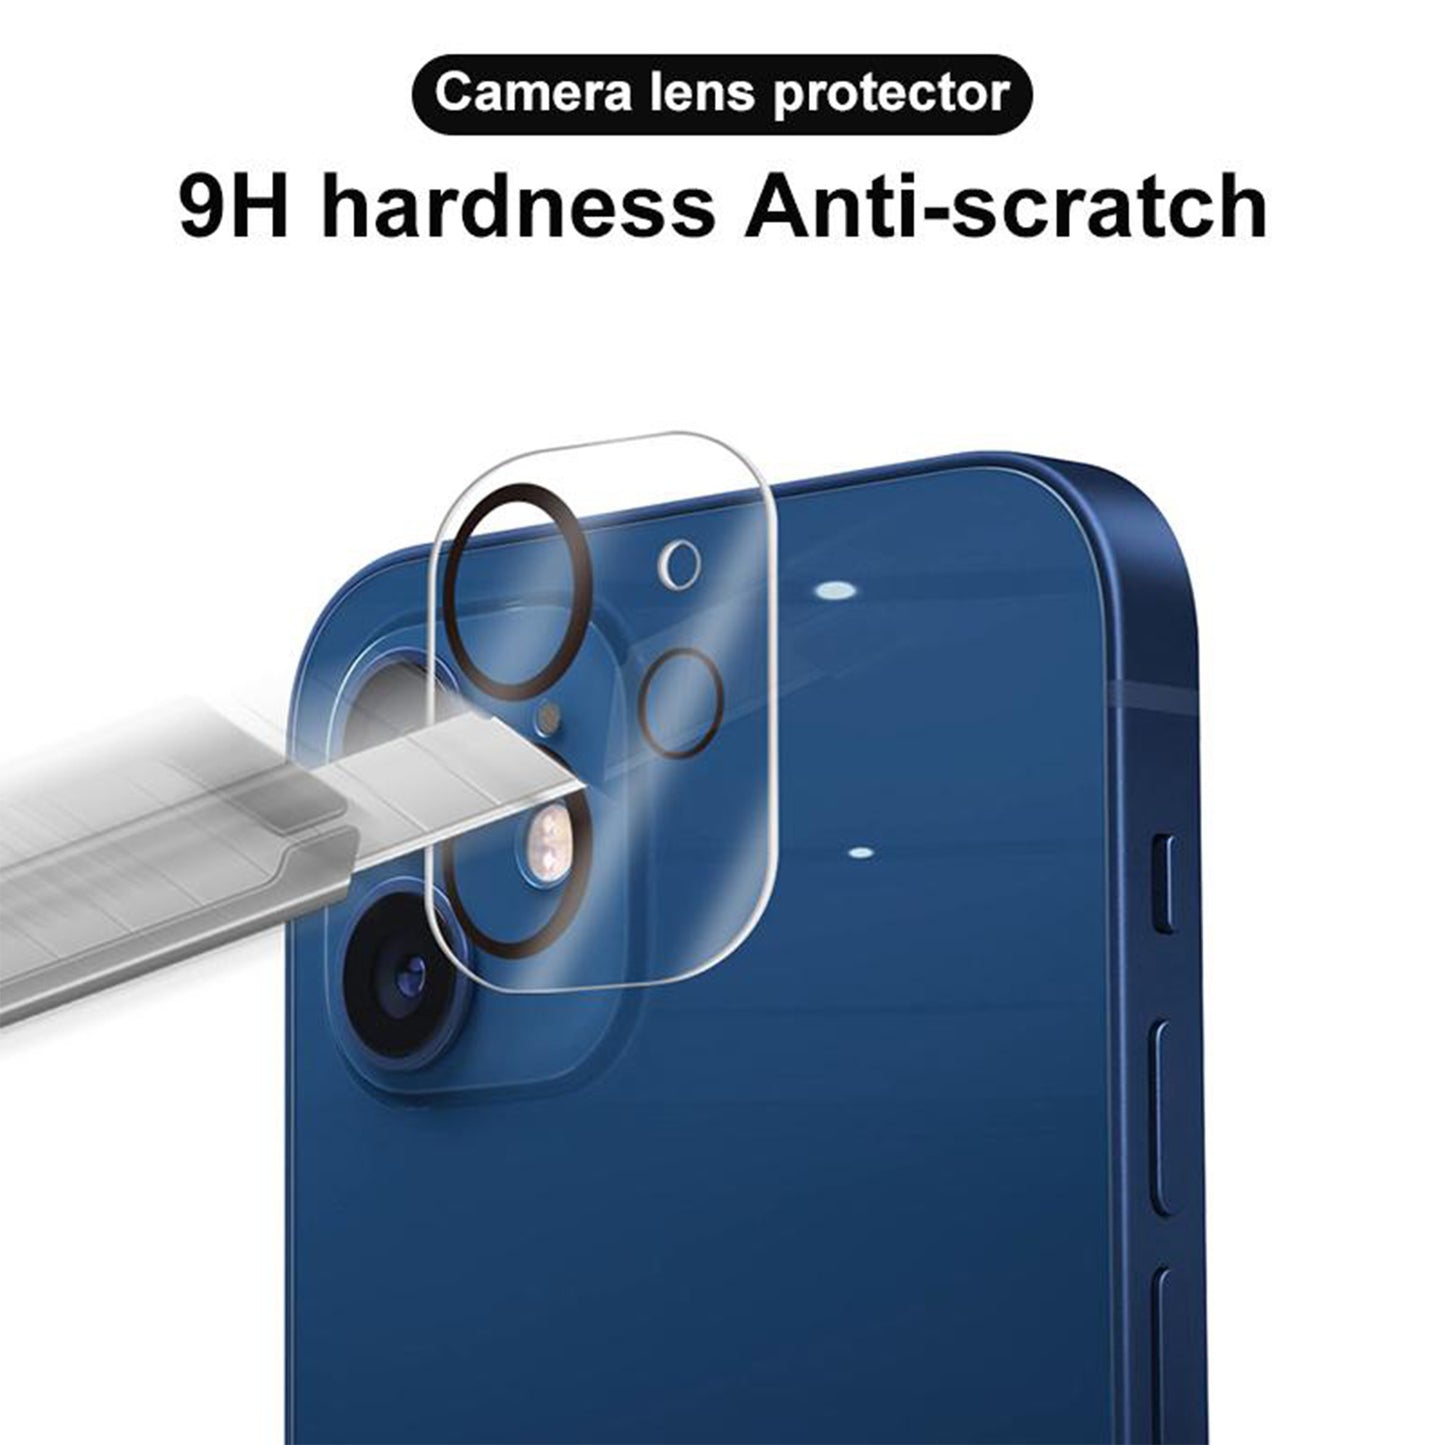 [2 Pack] MEZON Camera Lens Tempered Glass for iPhone 13 Pro Max (6.7") Premium Full Coverage – No Whitening from Flash